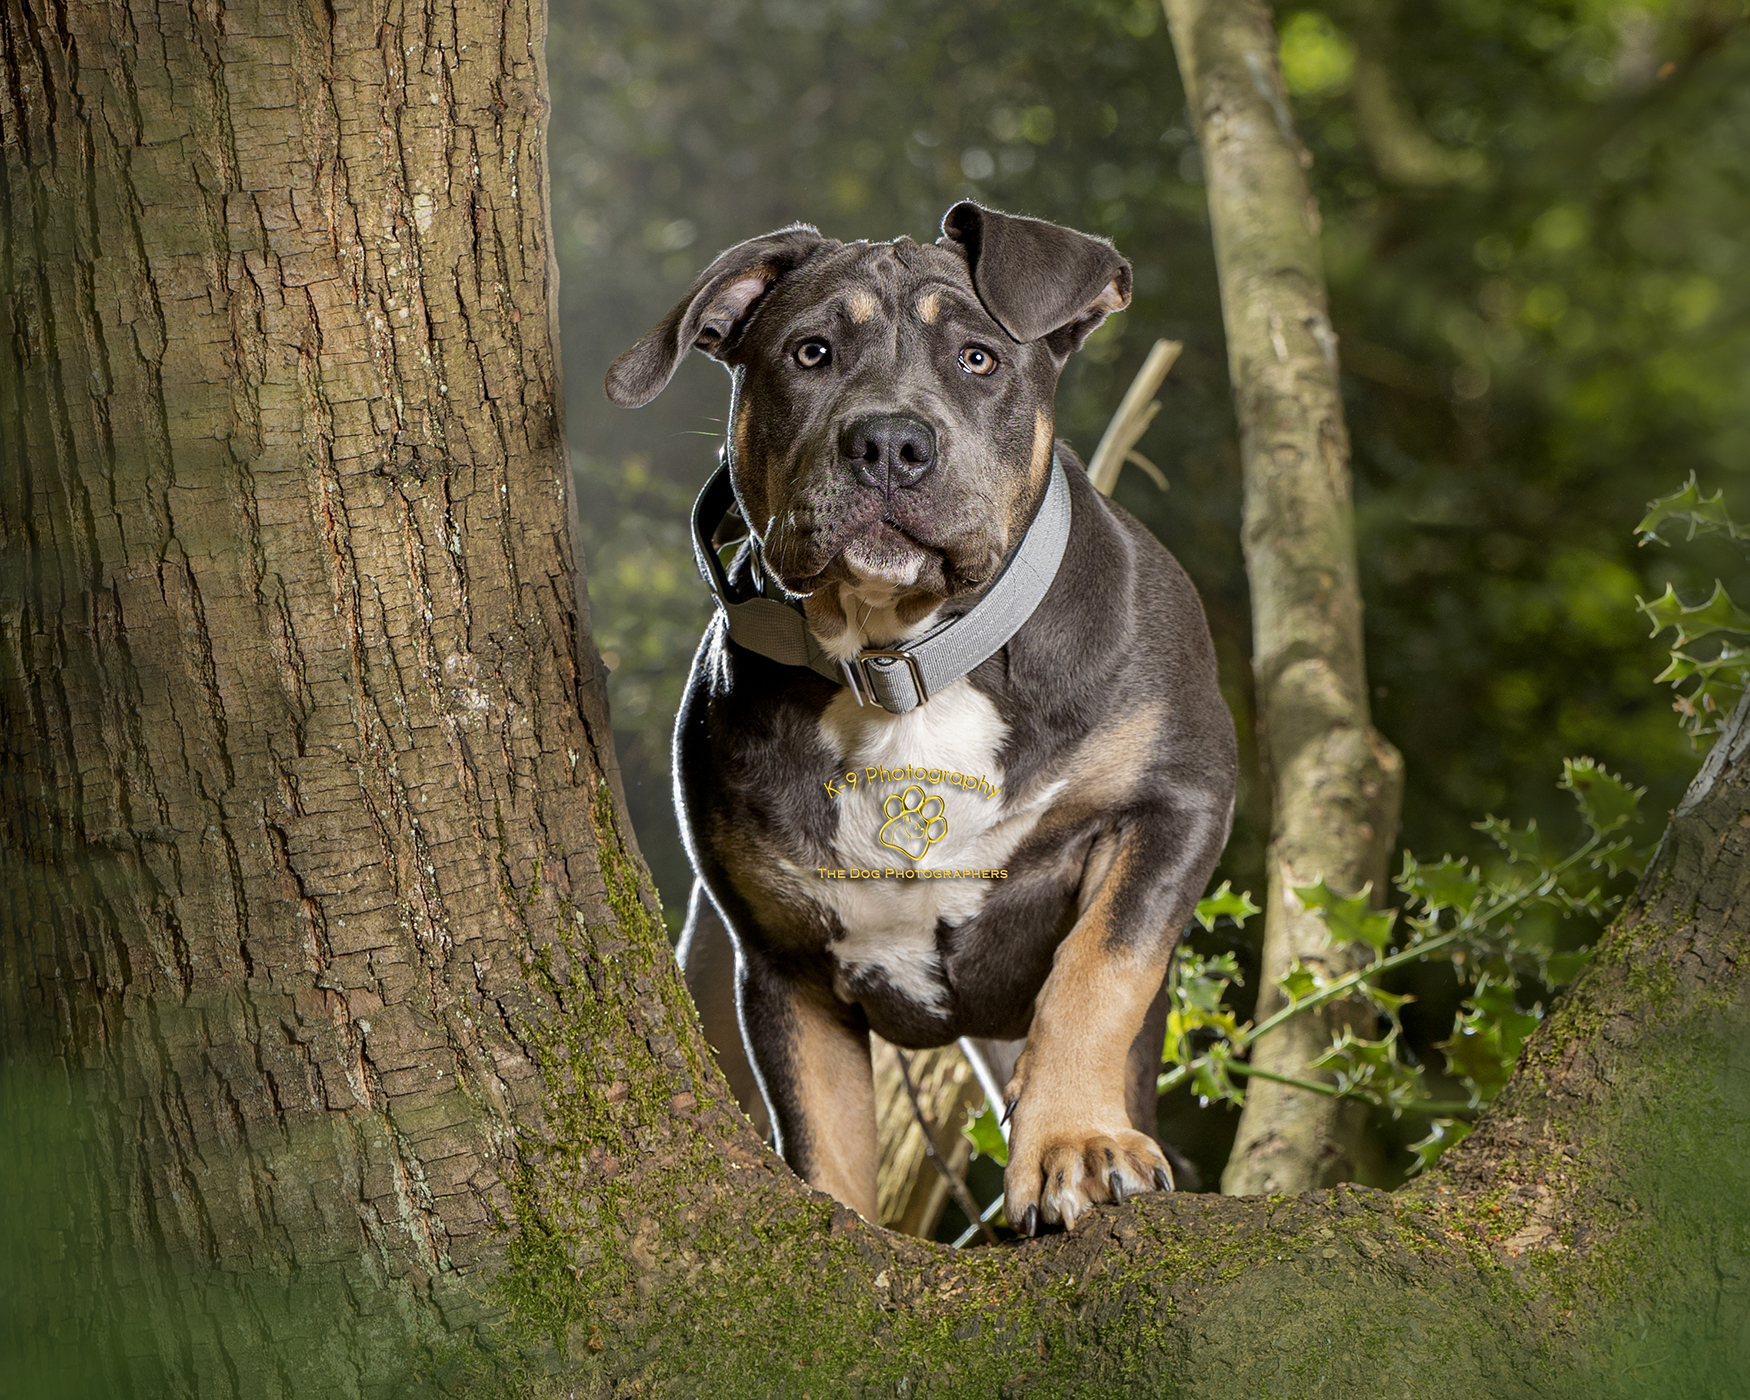 Adorable puppy photography in the UK | Pet photographer Adrian Bullers